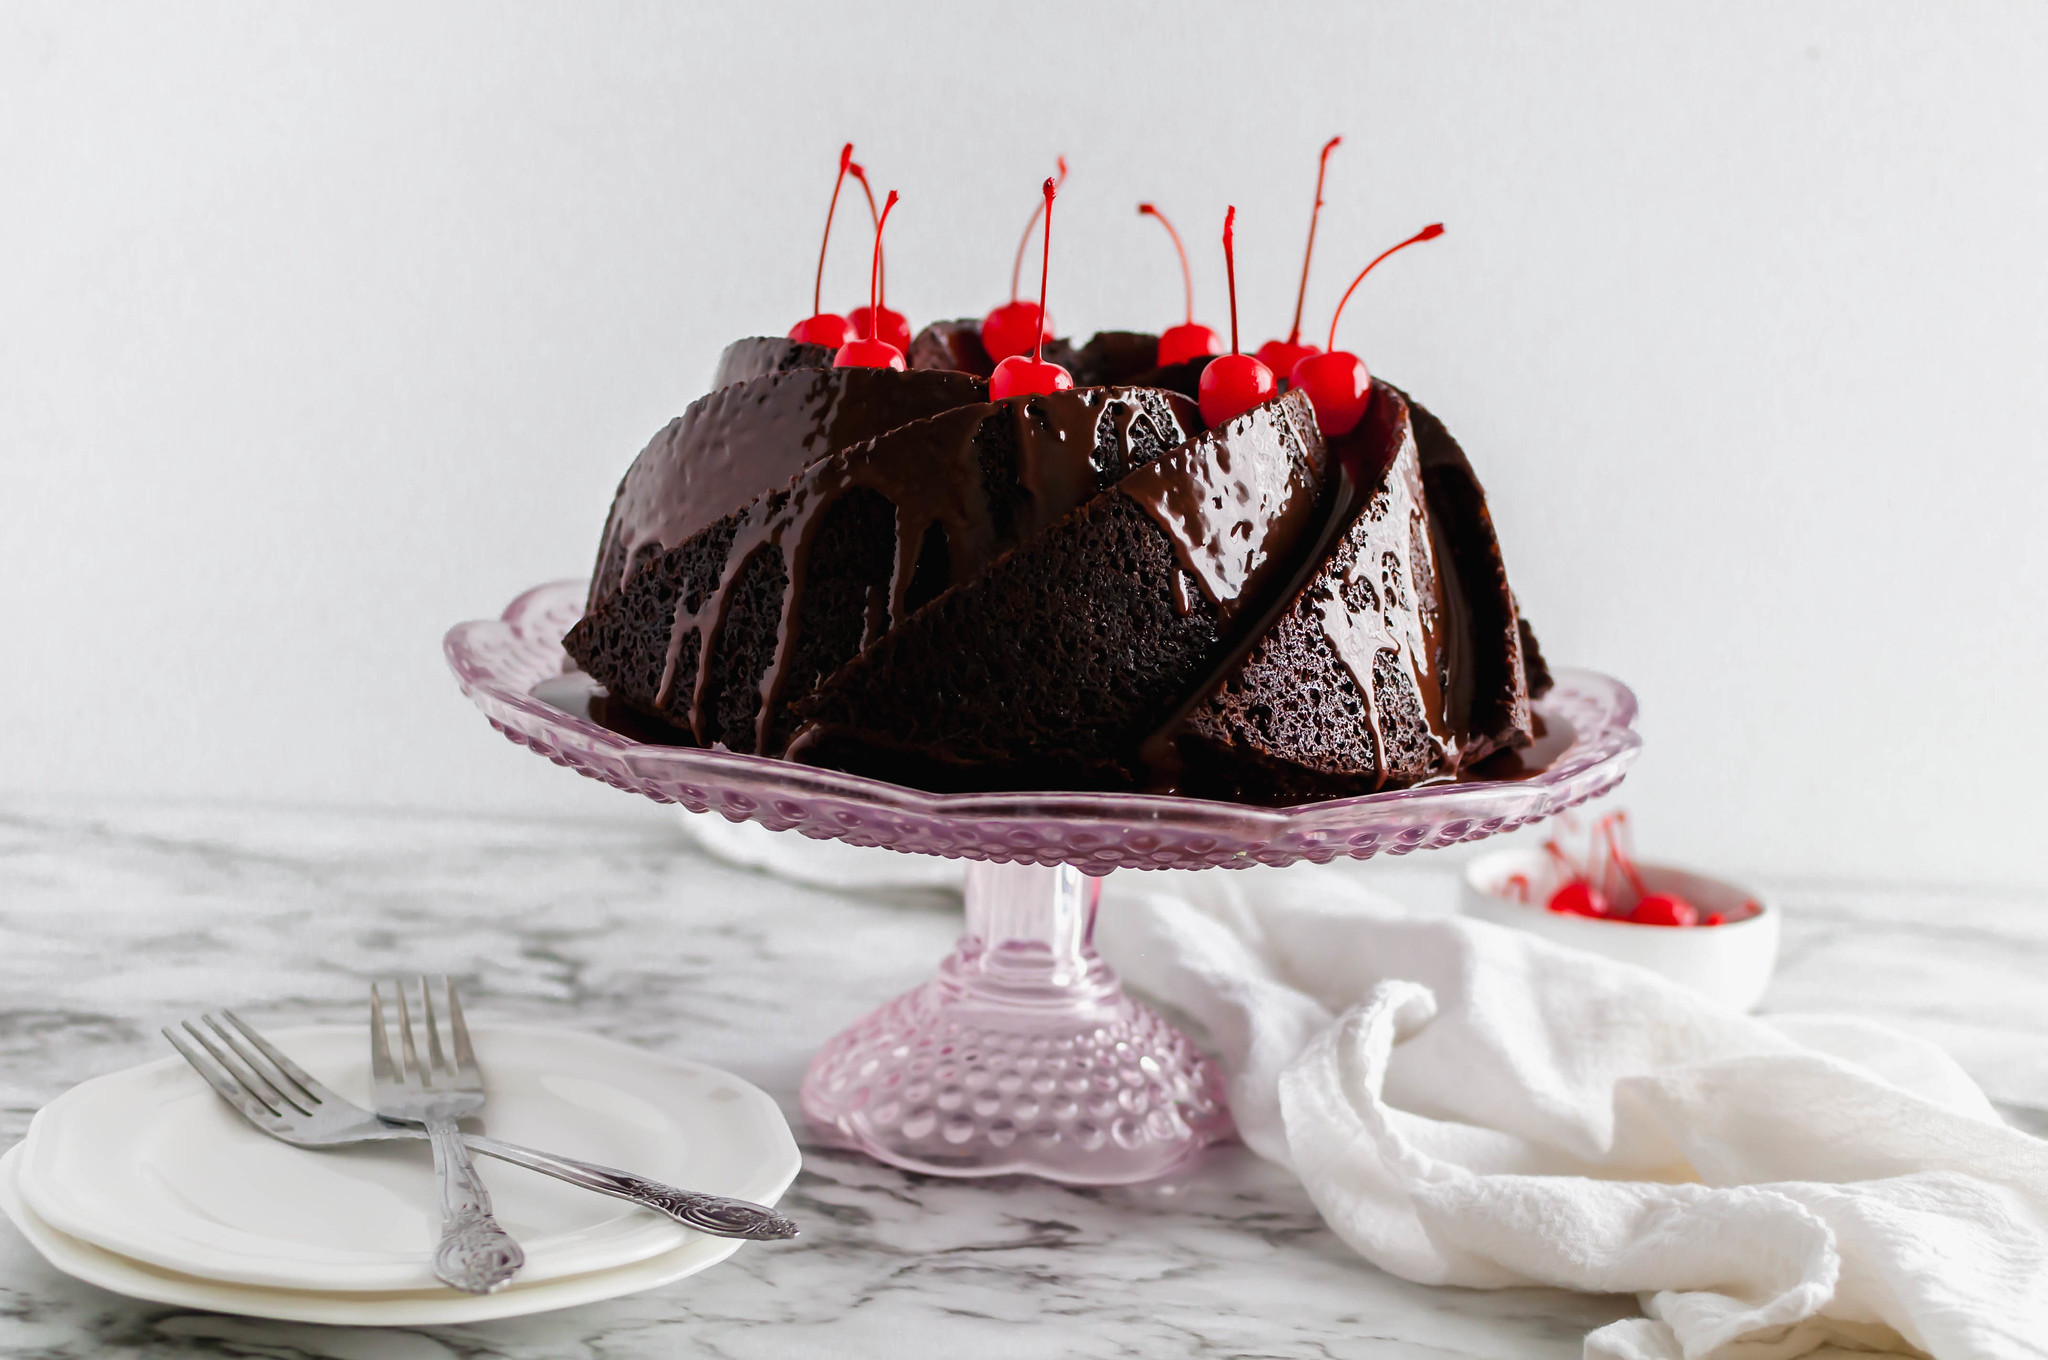 Celebrate National Chocolate Cake Day with this Chocolate Cherry Cake. It's incredibly rich and packed with fruity maraschino cherries.